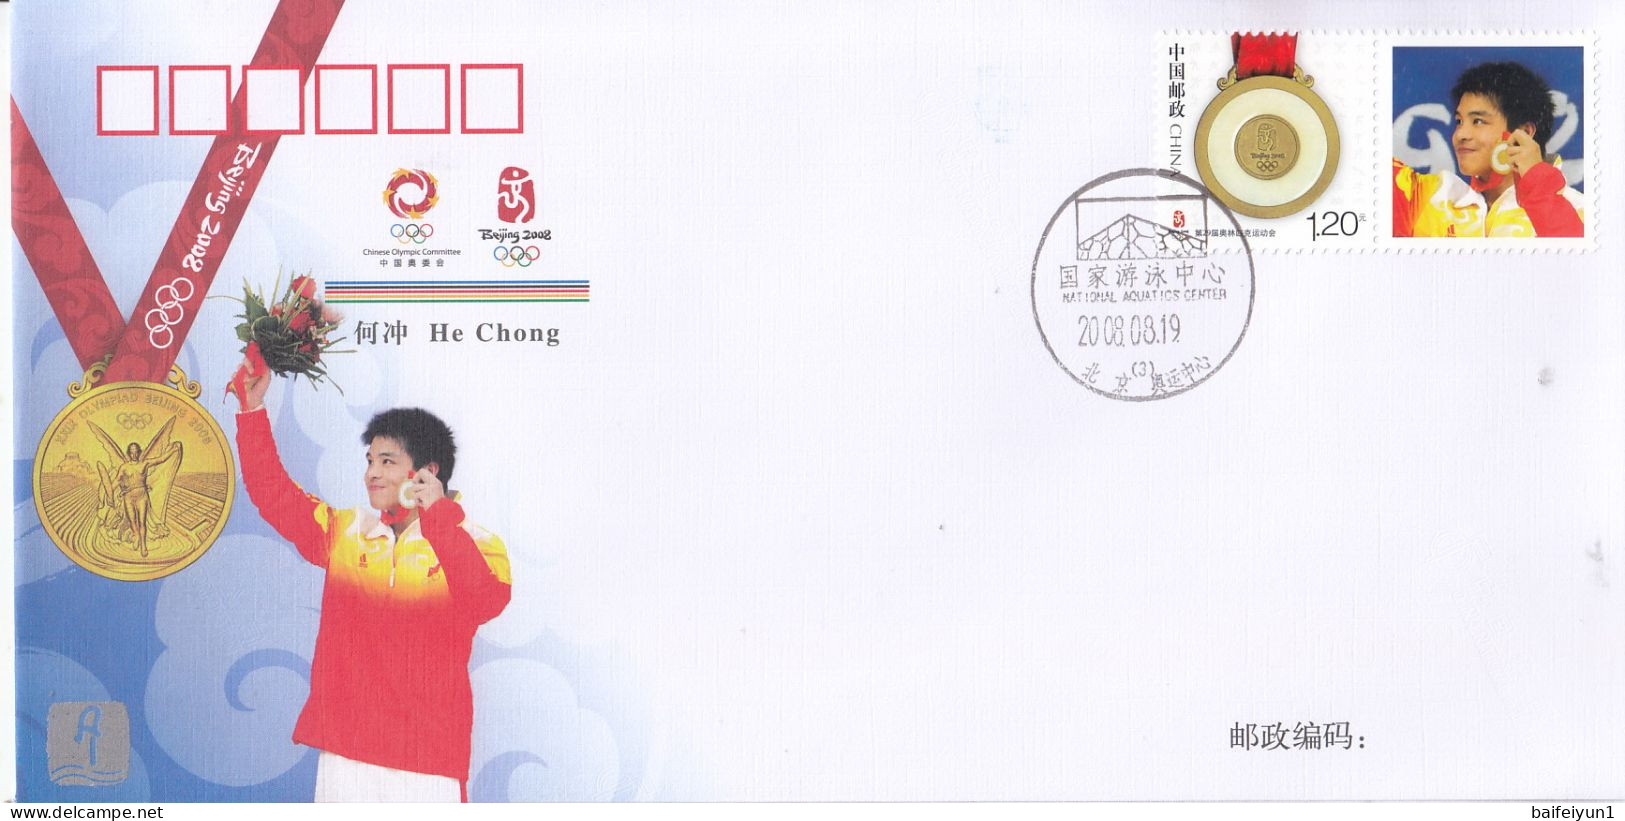 CHINA 2008 GPJF-1.51 Victory In Men's 3m Springboard In The Game Of The XXIX Olympiad Cover - Duiken